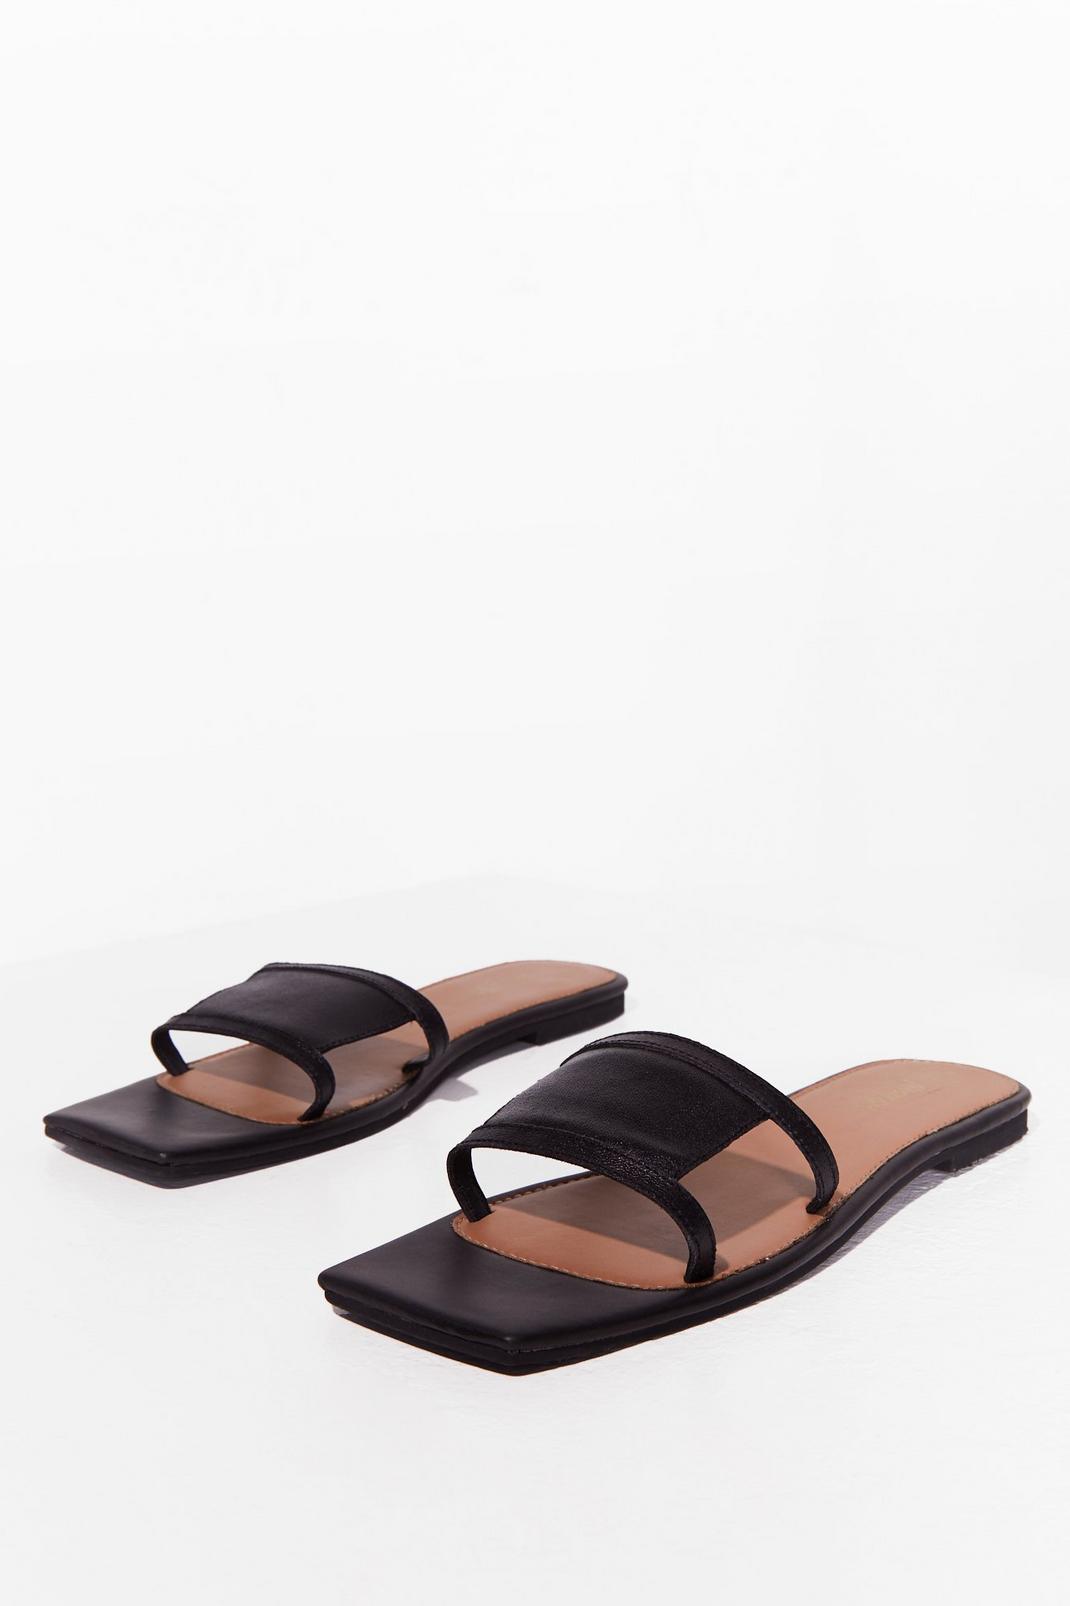 Knock Knock Who's Square Toe Leather Sandals image number 1